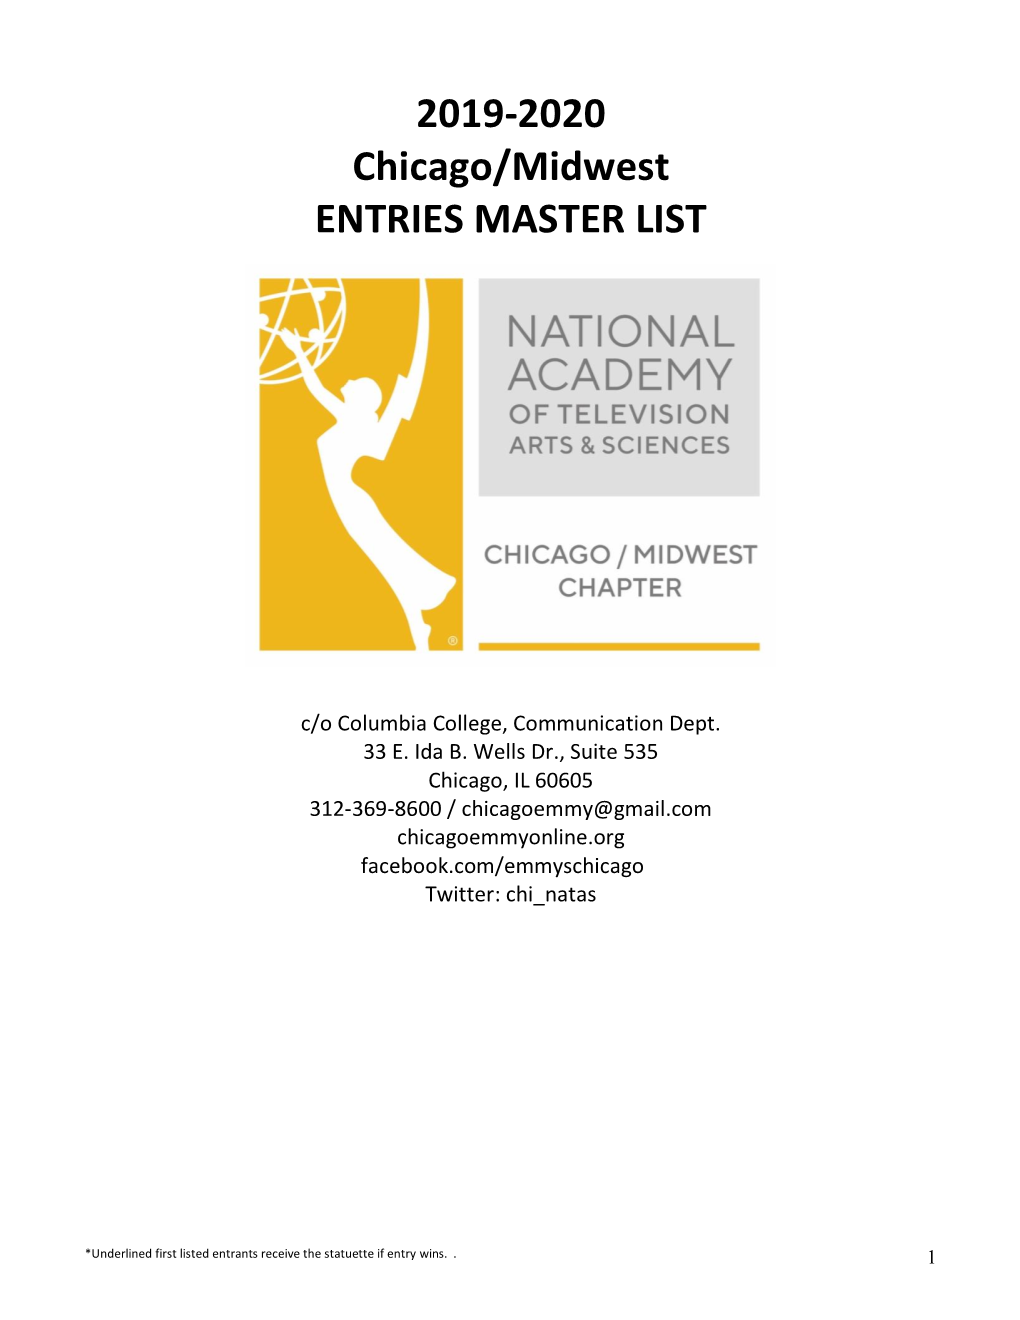 2019-2020 Chicago/Midwest ENTRIES MASTER LIST